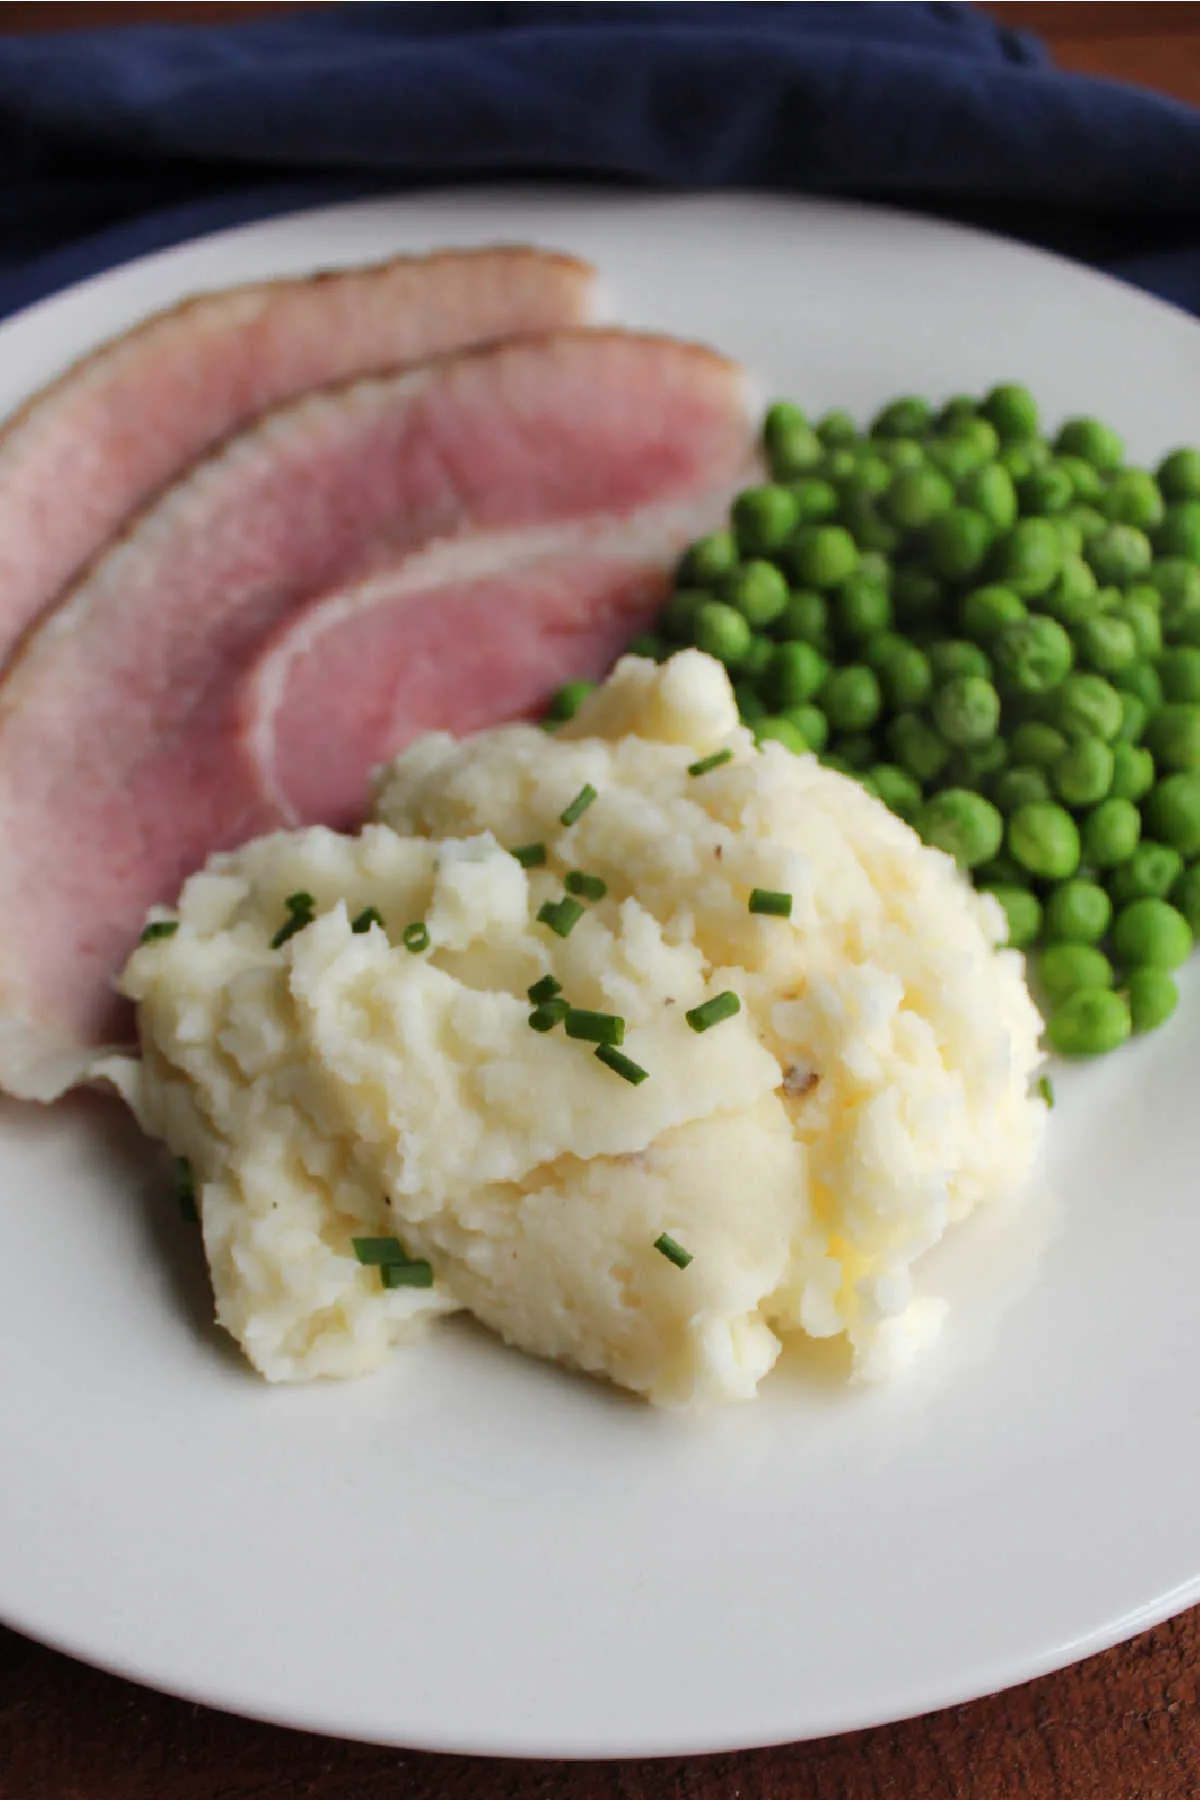 Plate of sour cream and chive mashed potatoes, slices of ham and peas.